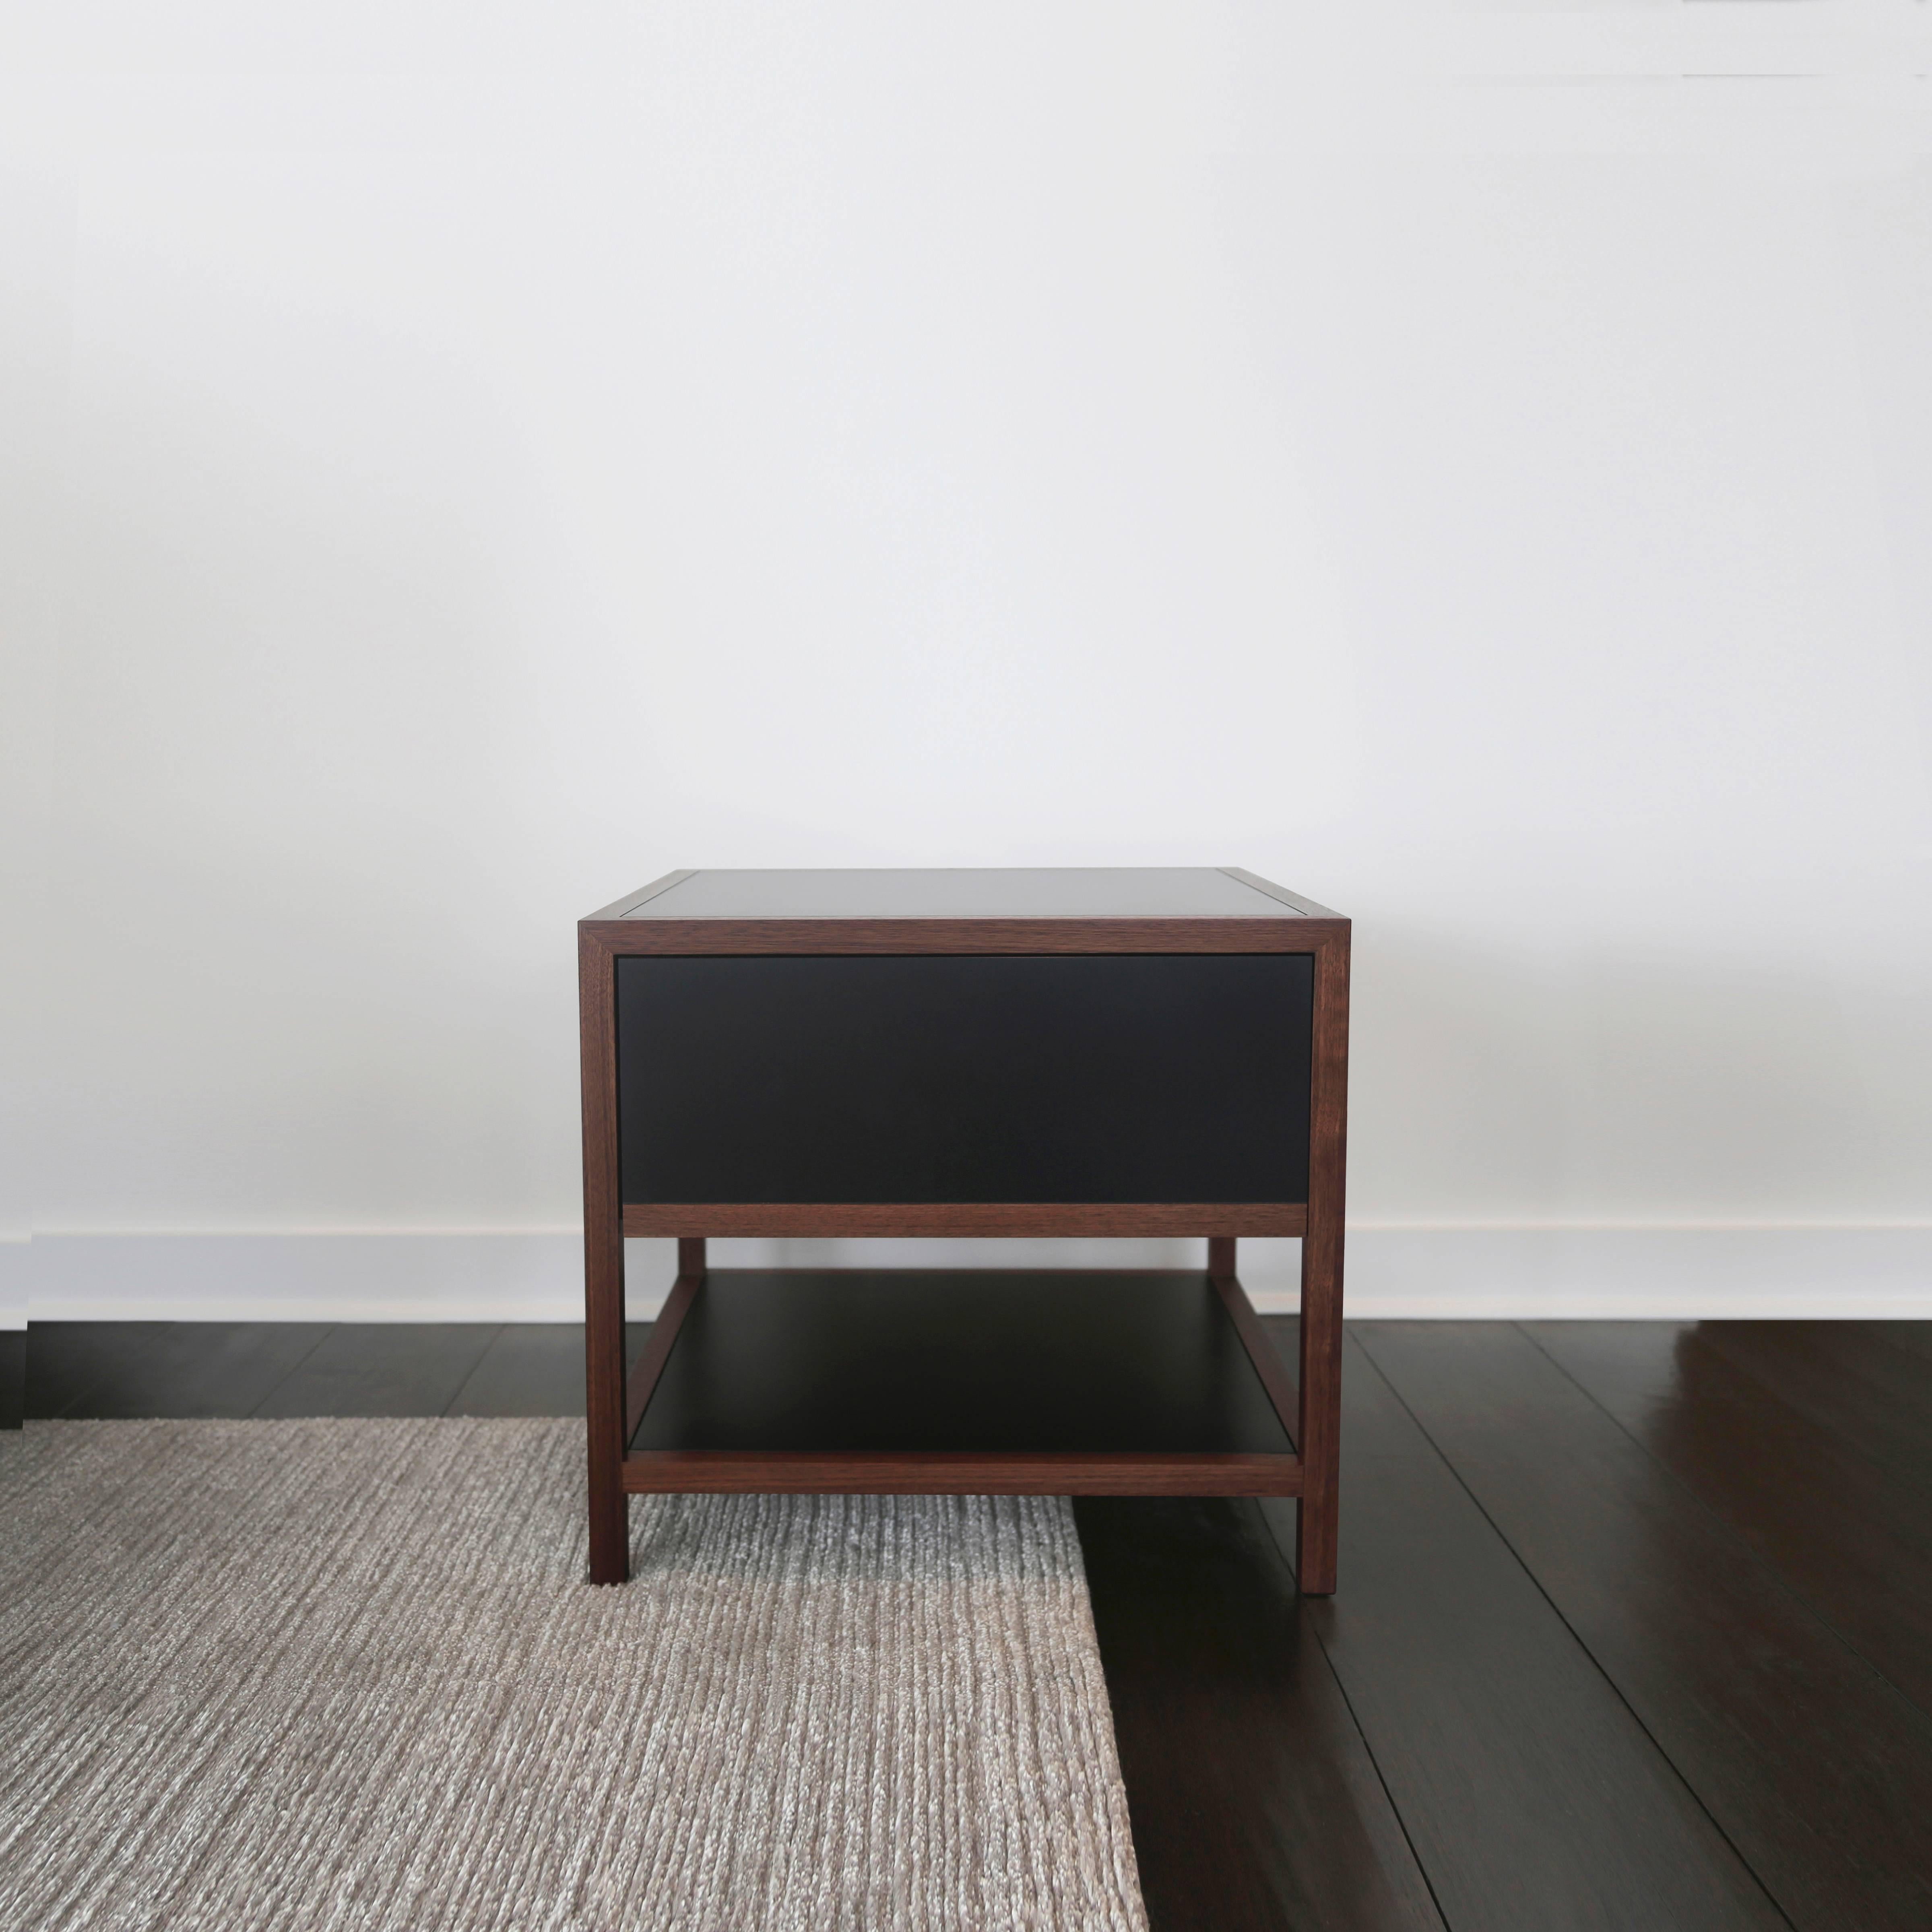 Framed in solid walnut and clad with a recycled paper composite, the Driver Side Table blends classic triple miter joinery with modern building materials. The composite, made of FSC Certified Recycled Paper, has a wax finish that develops a rich